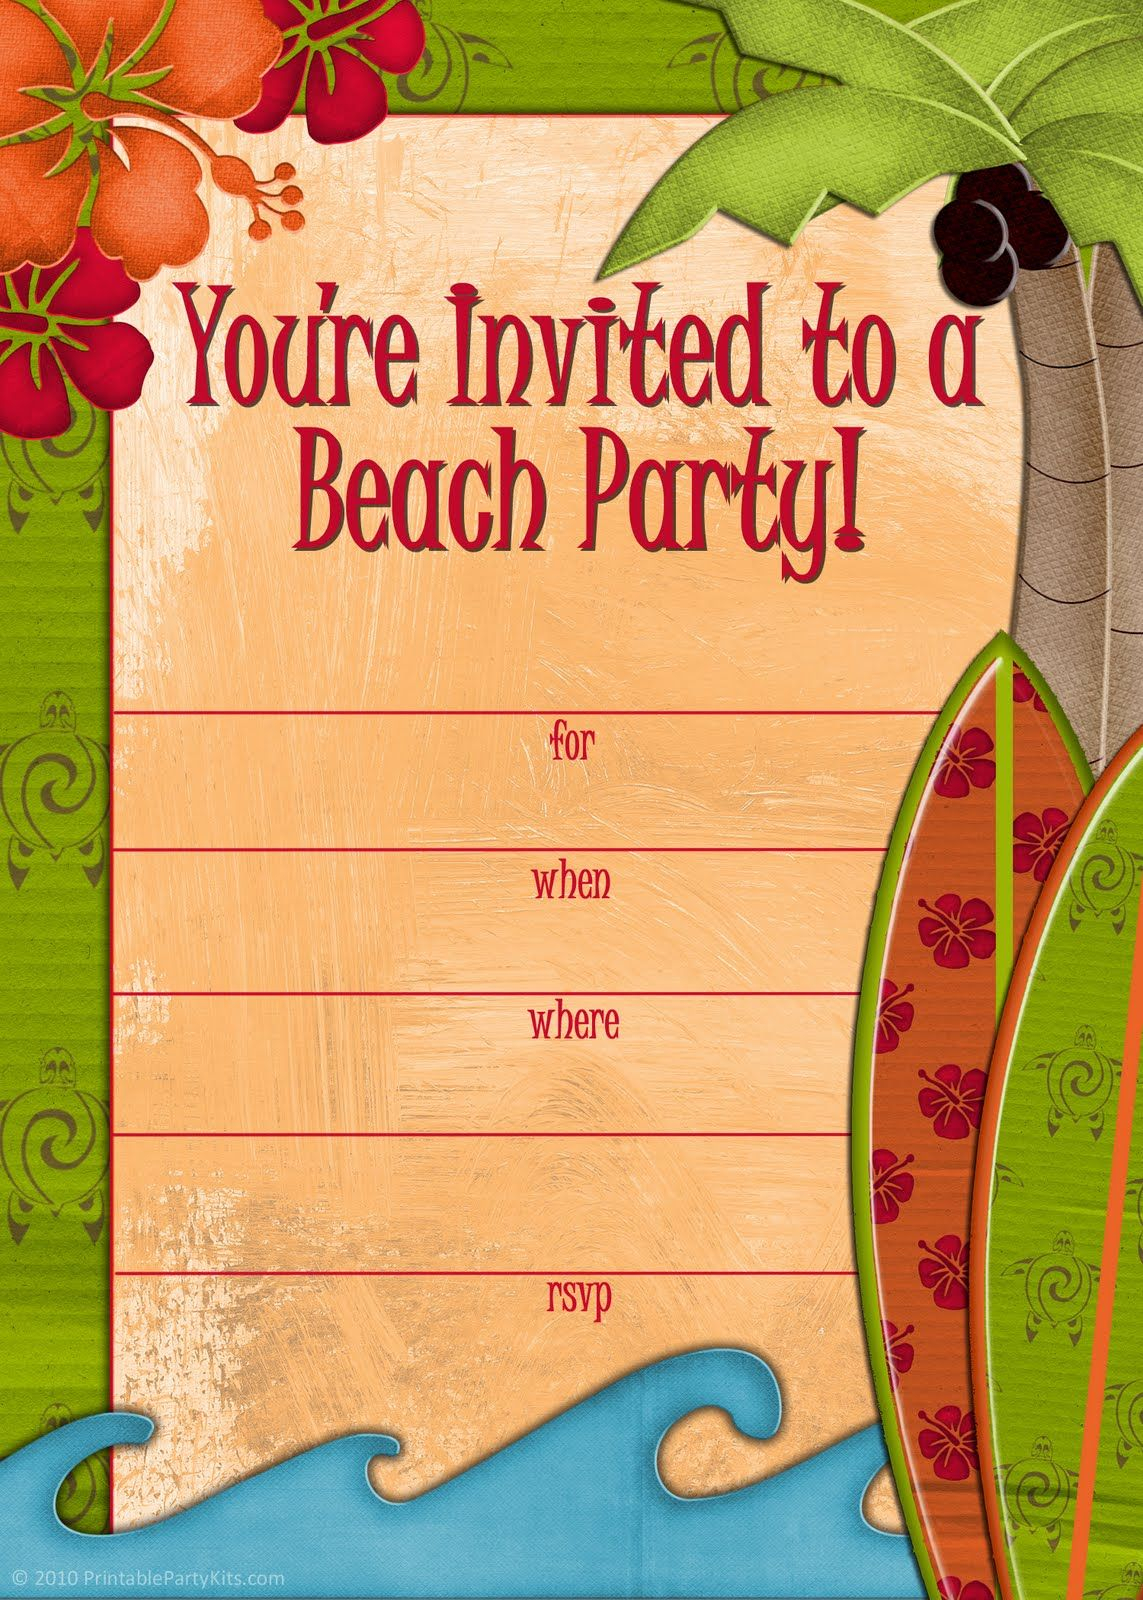 Free Printable Beach Party Invitations From in size 1143 X 1600